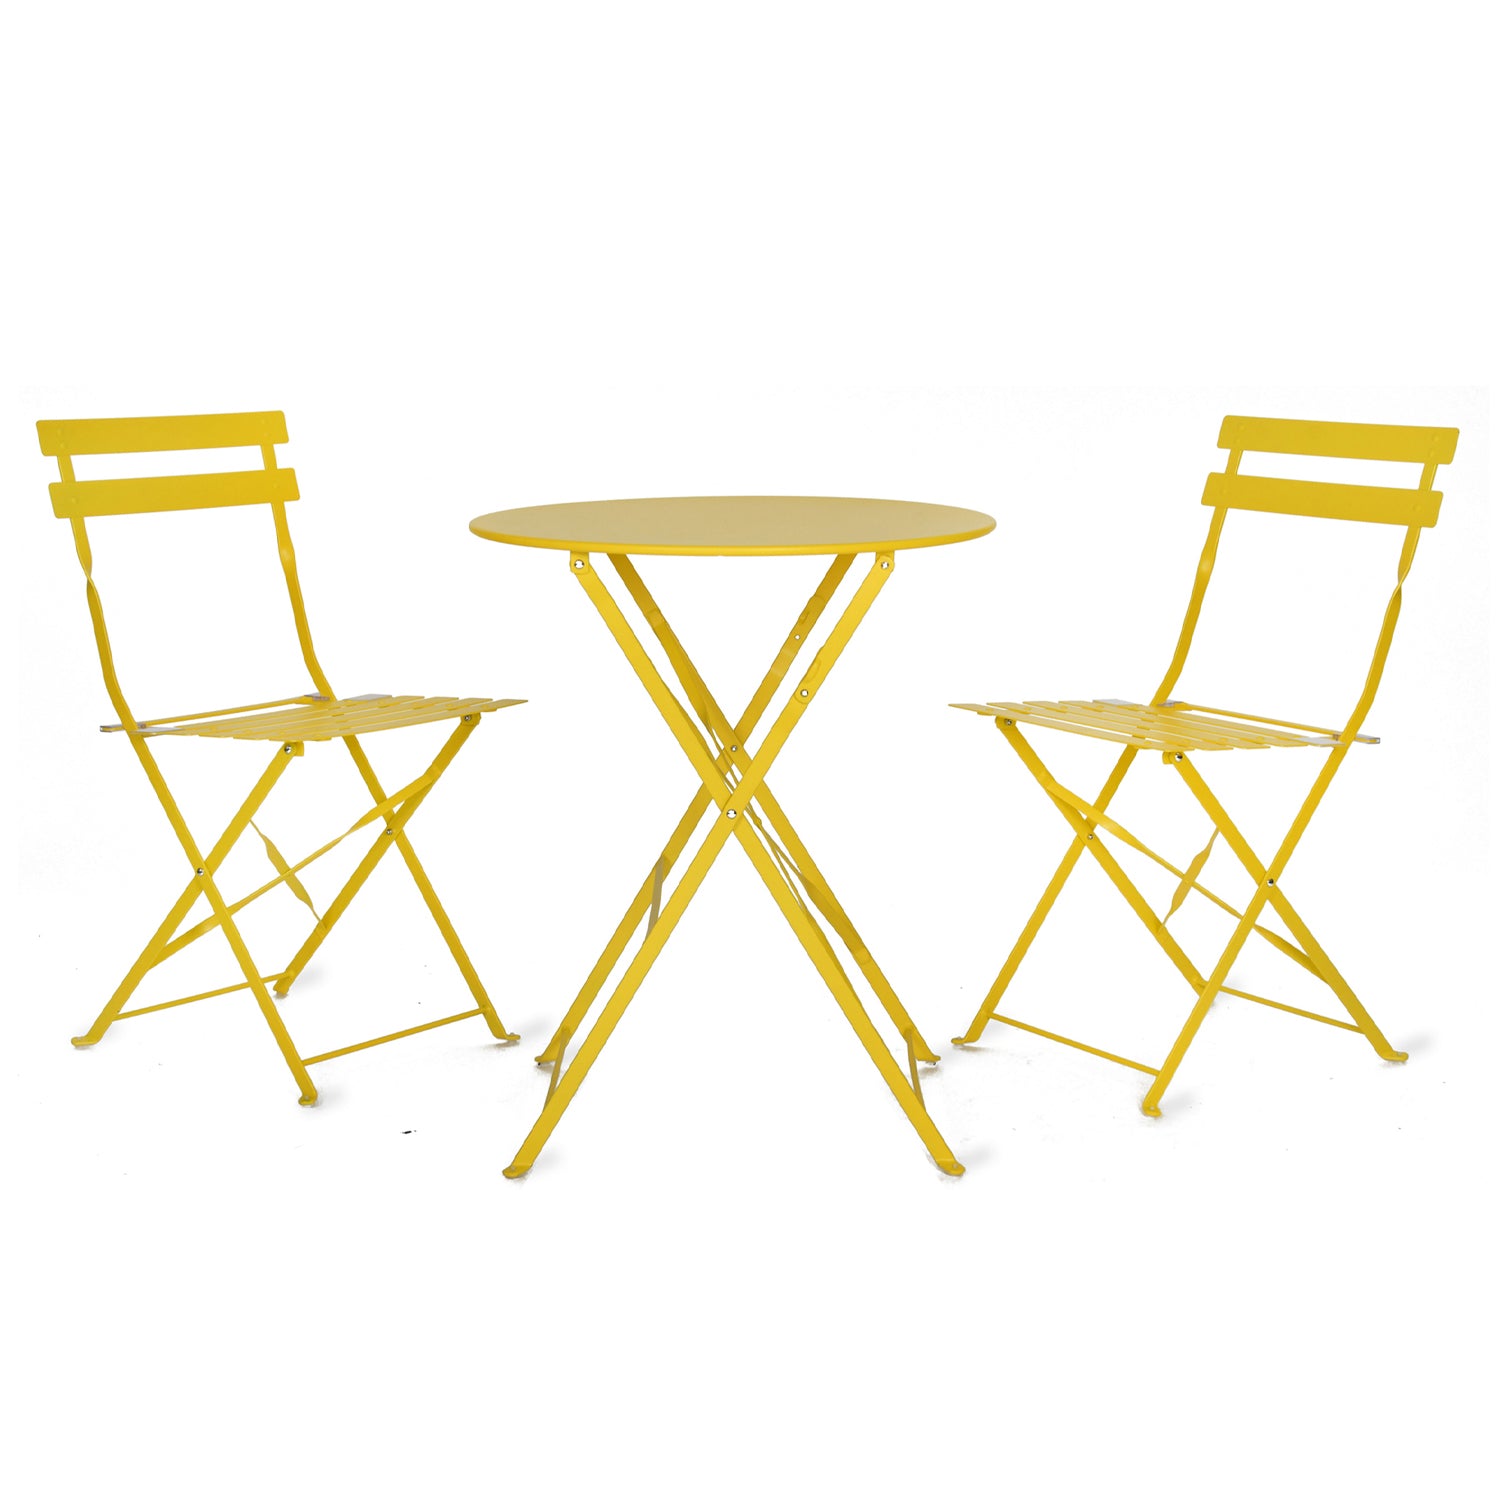 Rive Droite Bistro Outdoor Small Set in Lemon Steel by Garden Trading